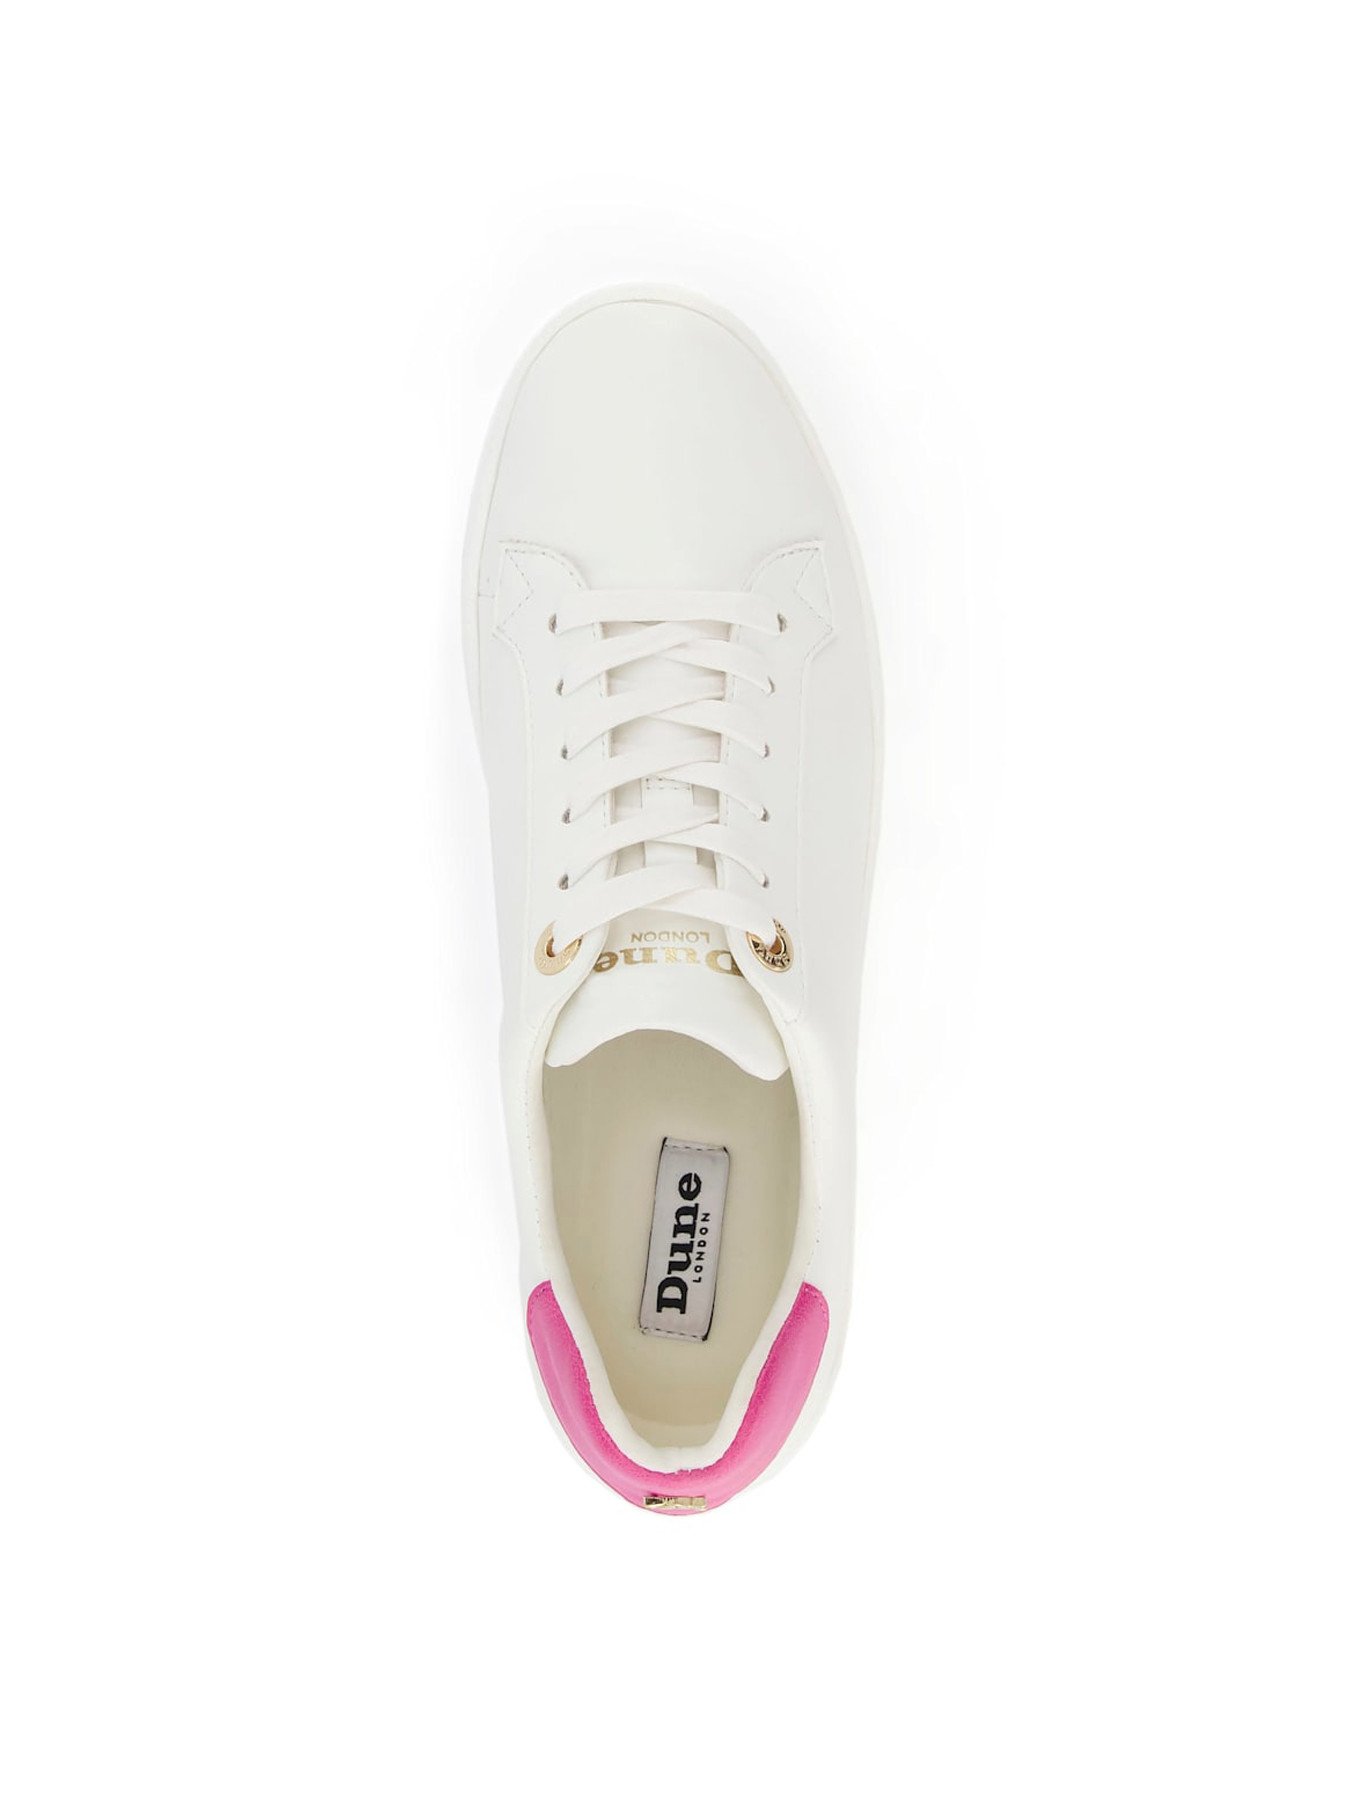 DUNE LONDON WHITE Trainers With Blue Star. Size 6 Brand New In Box £50.00 -  PicClick UK